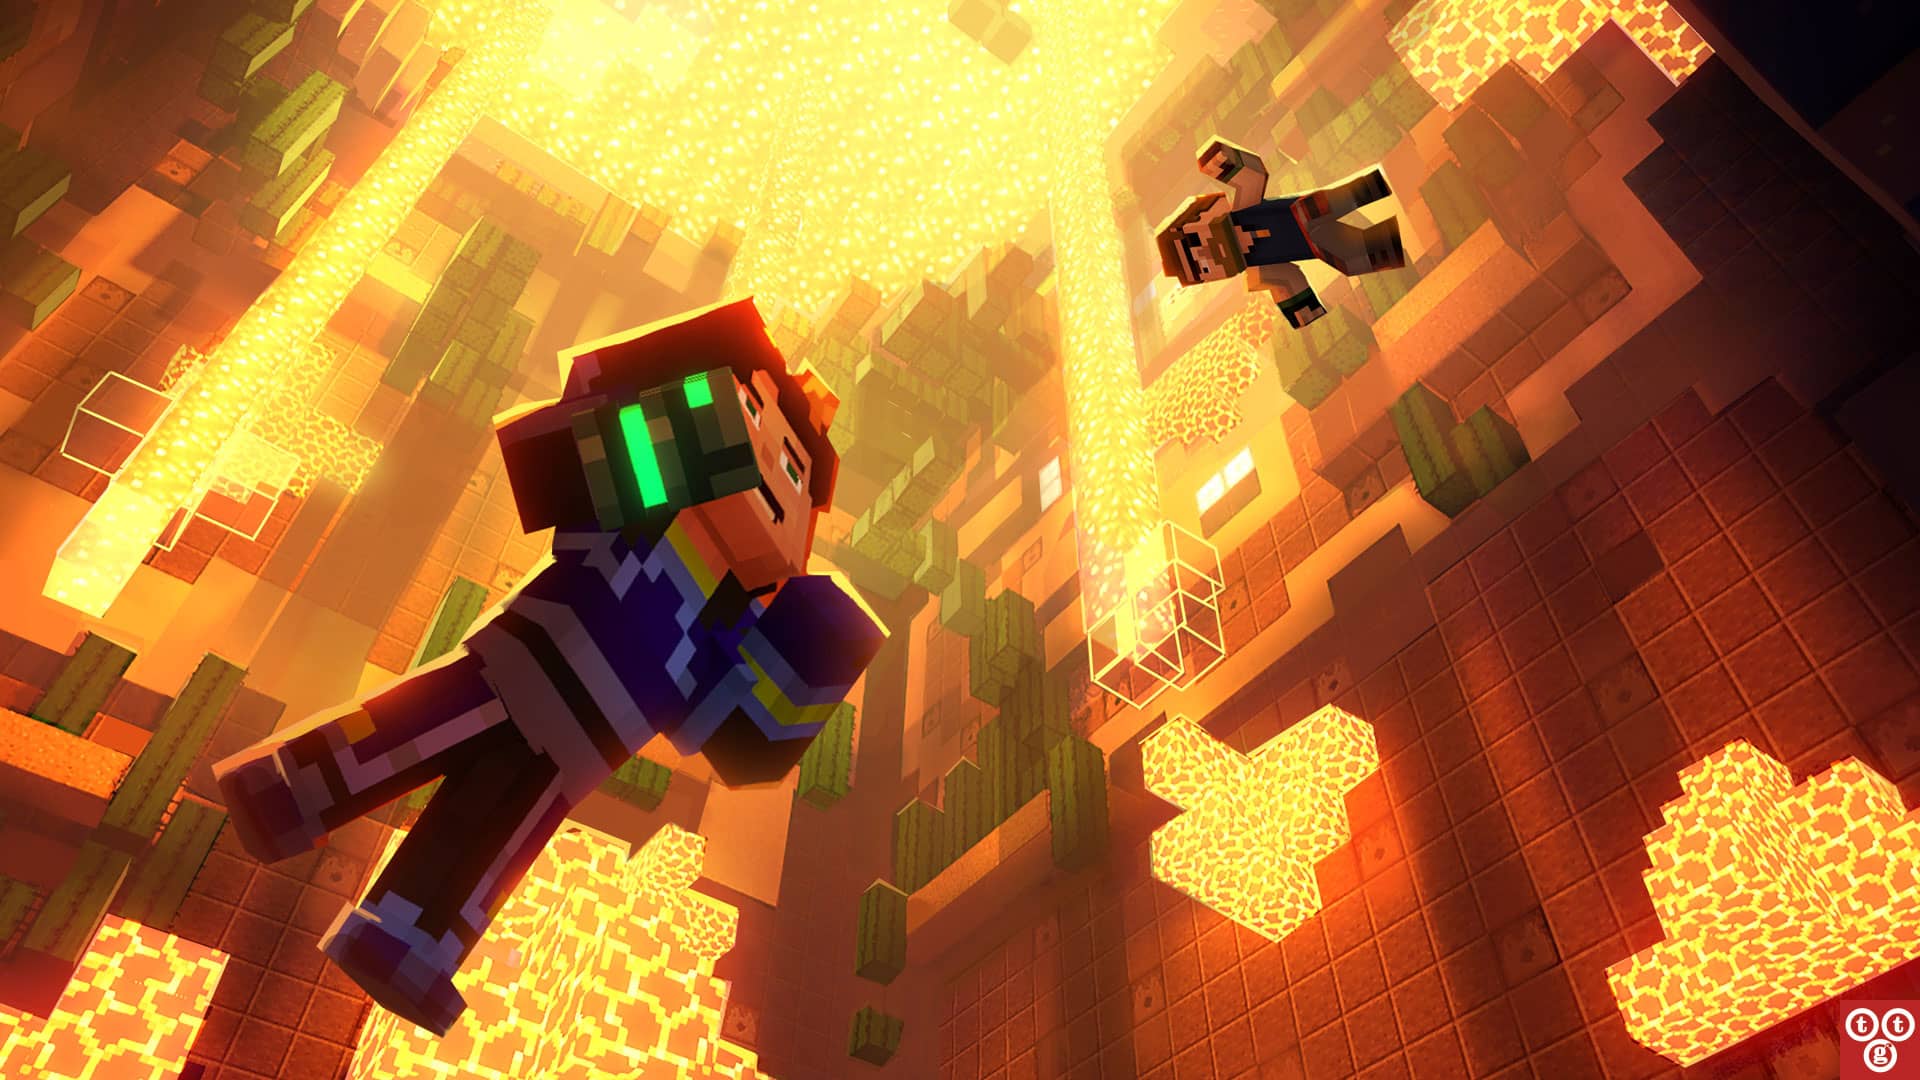 minecraft story mode season 2 wallpapers Wallpapers